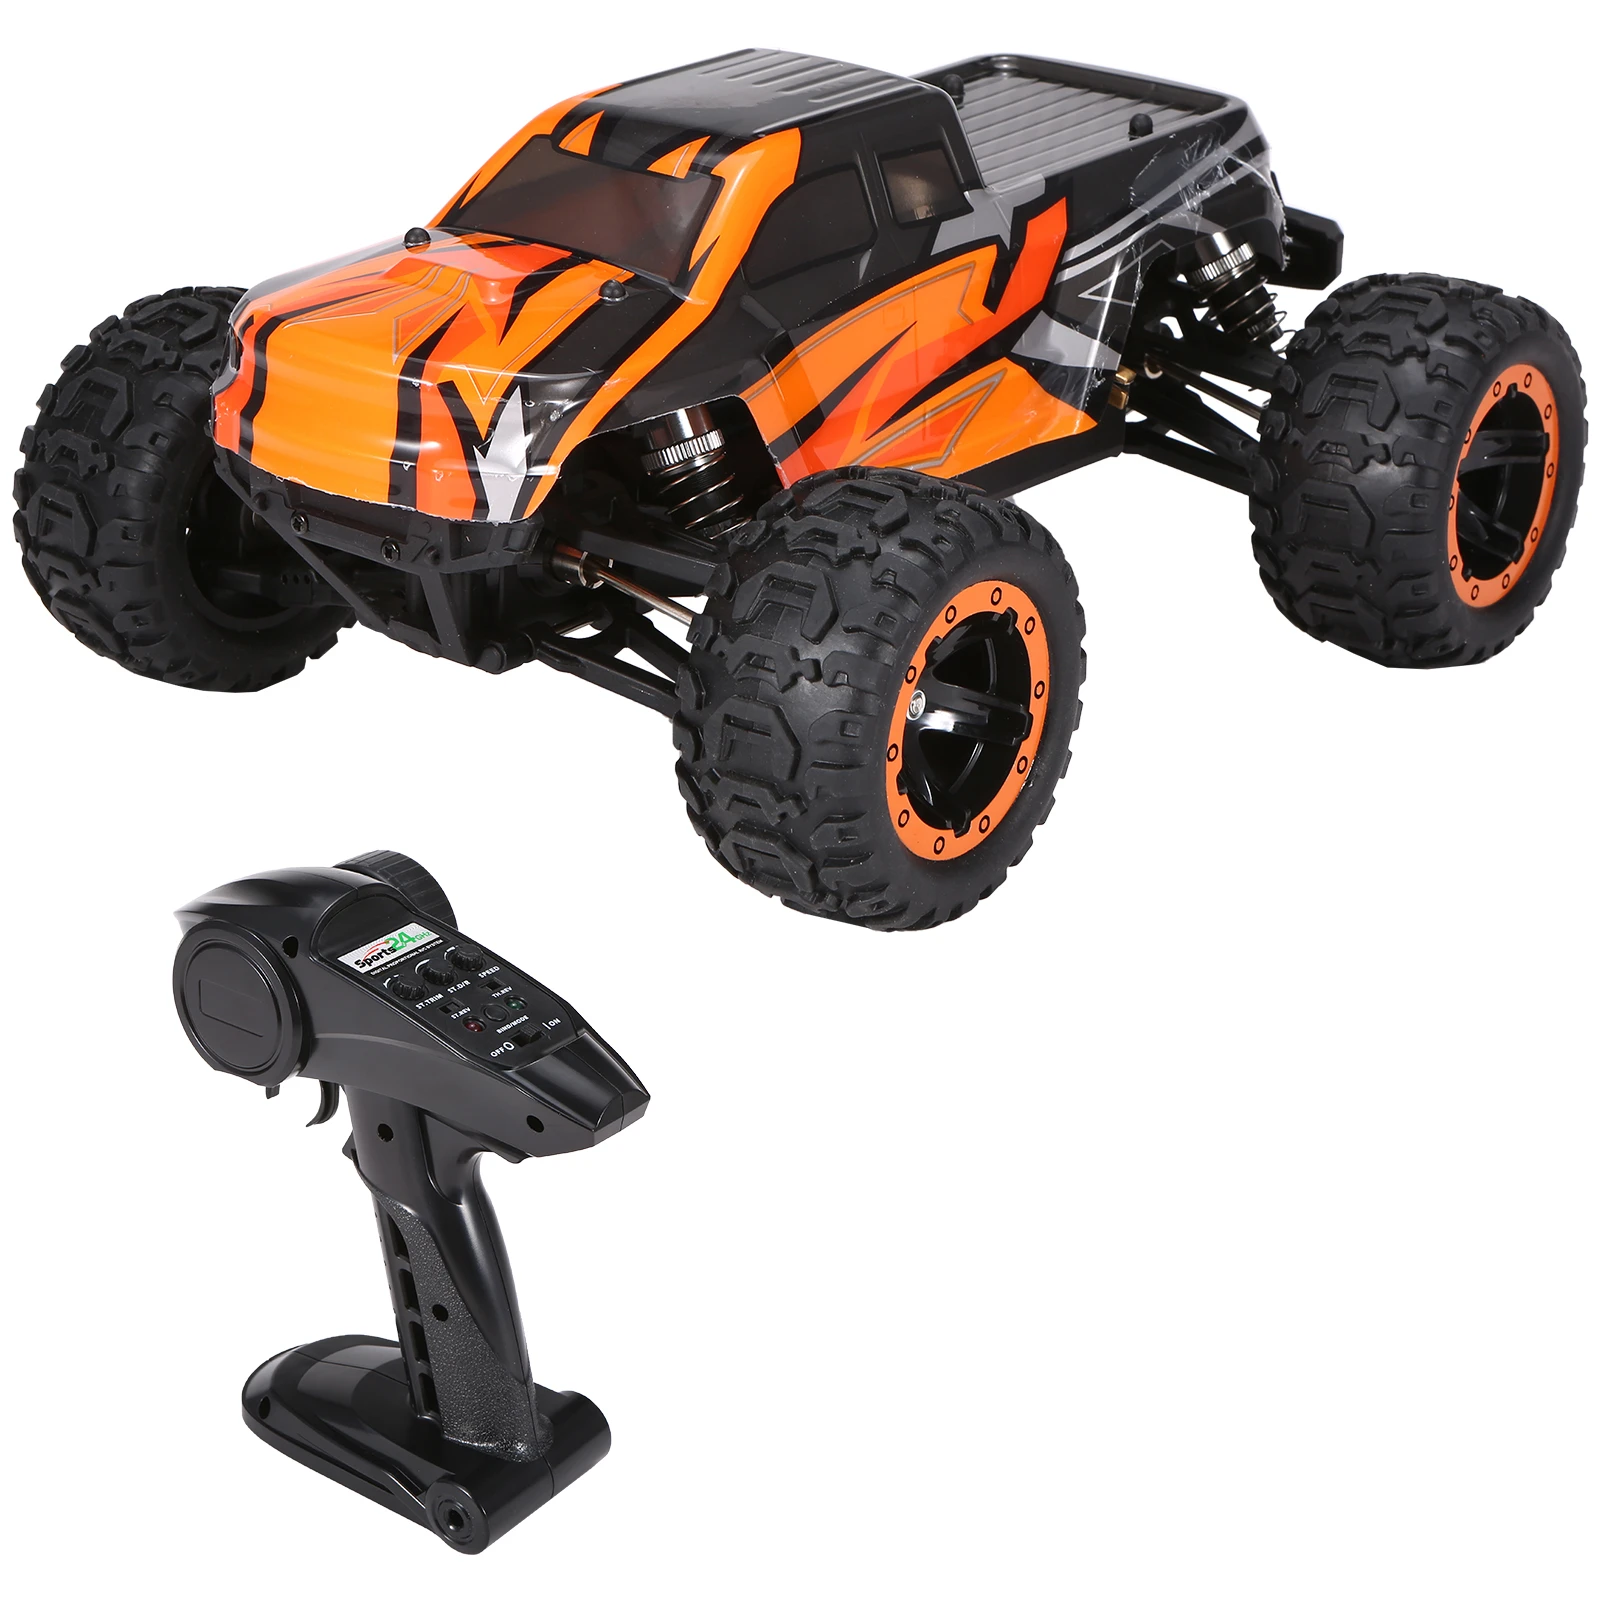 16889A-Pro 1/16 2.4G 4WD 45km/h RC Car Brushless Motor Vehicle with LED Light Electric Off-Road Truck RTR Model VS 9125 12428 rc cars for adults